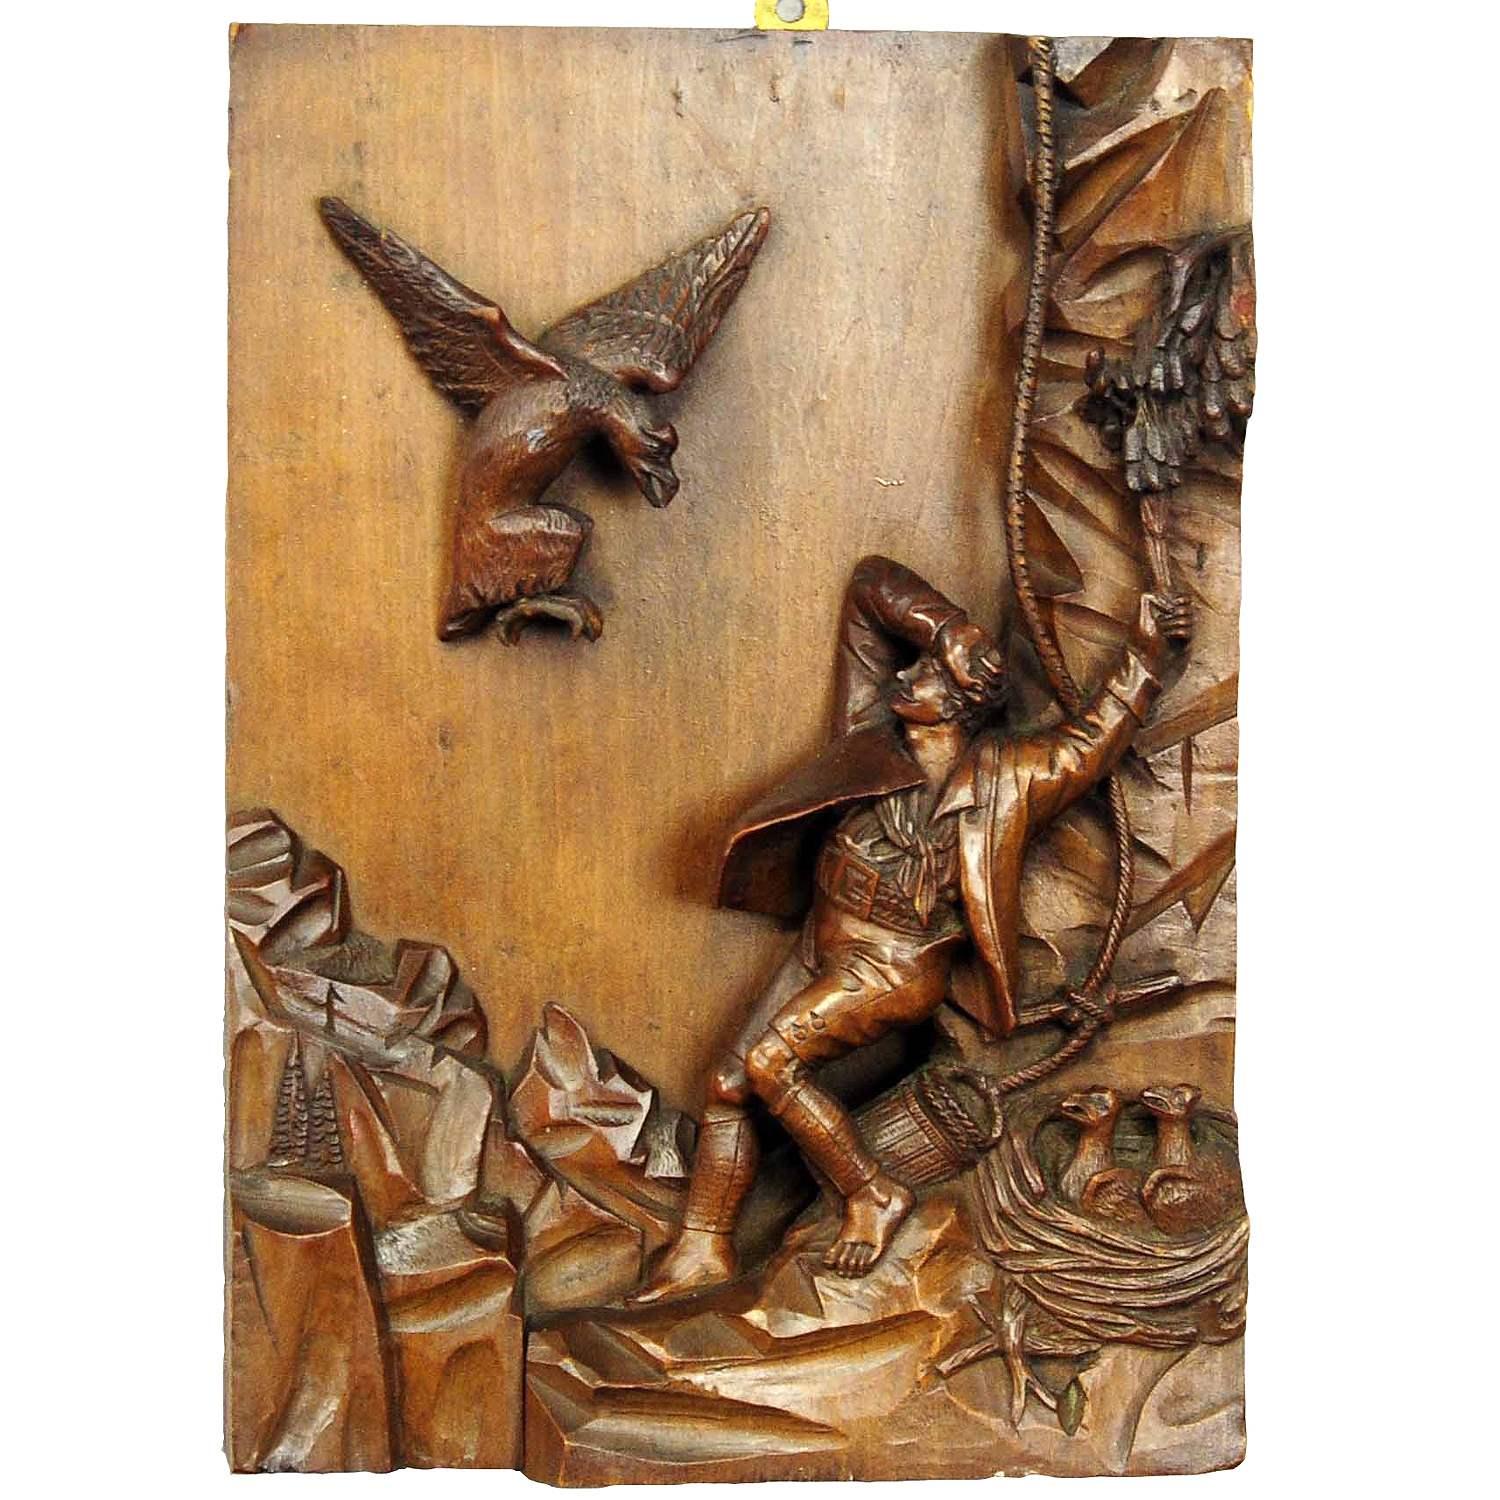 Relief wood carving nest Robber, black forest ca. 1890

A fine wood carving relief depicting a scenery of a nest robbing of a raptor by a man. The model for this carving was painted by Josef Anton Strassgschwandtner (1826-1881) and is titled